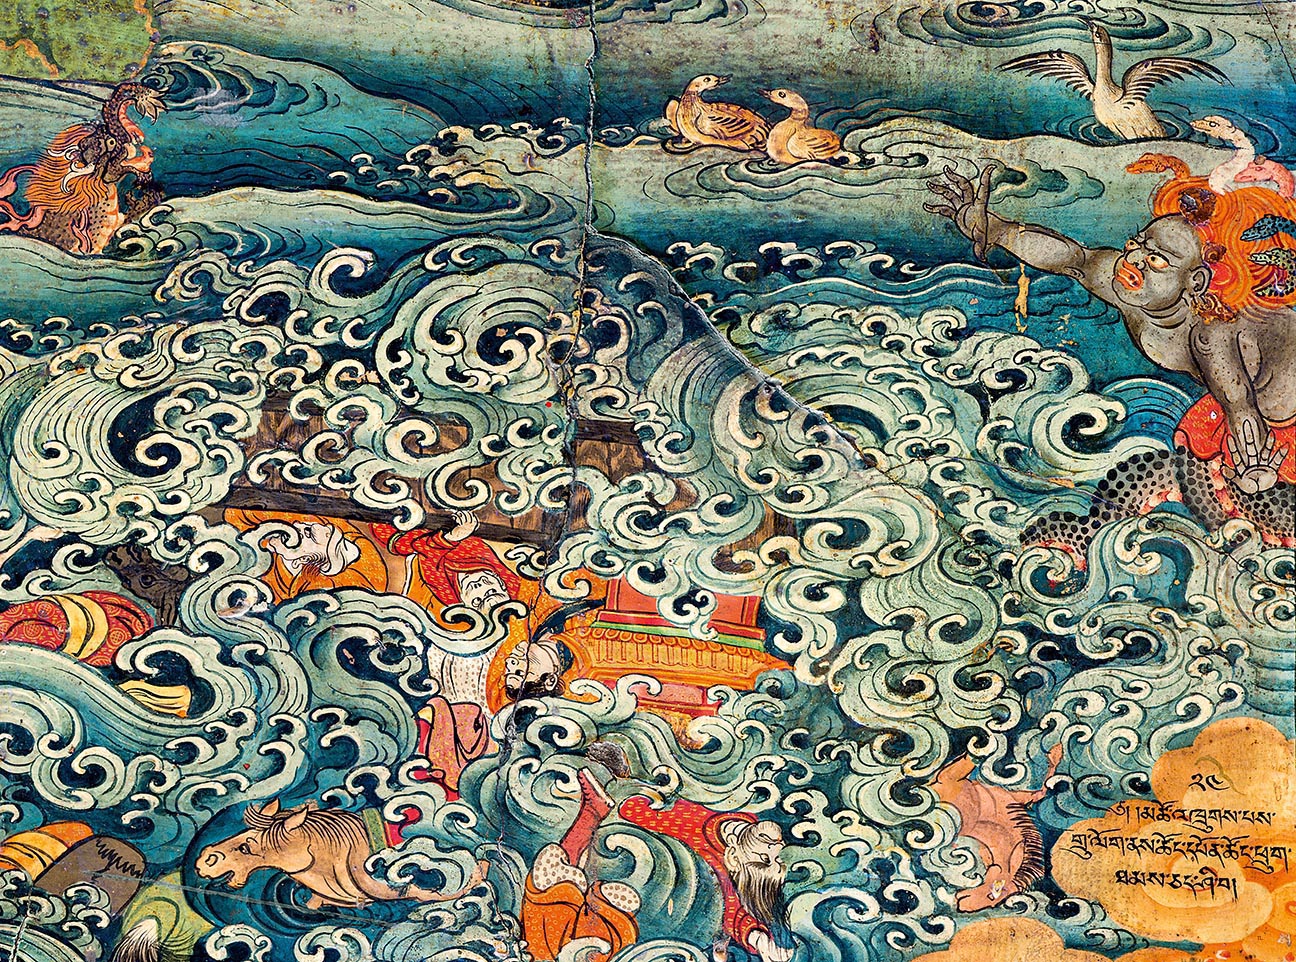 Mural depicting boat, animals, and humans sinking below stylized, frothing waves with wrathful snake deity at right